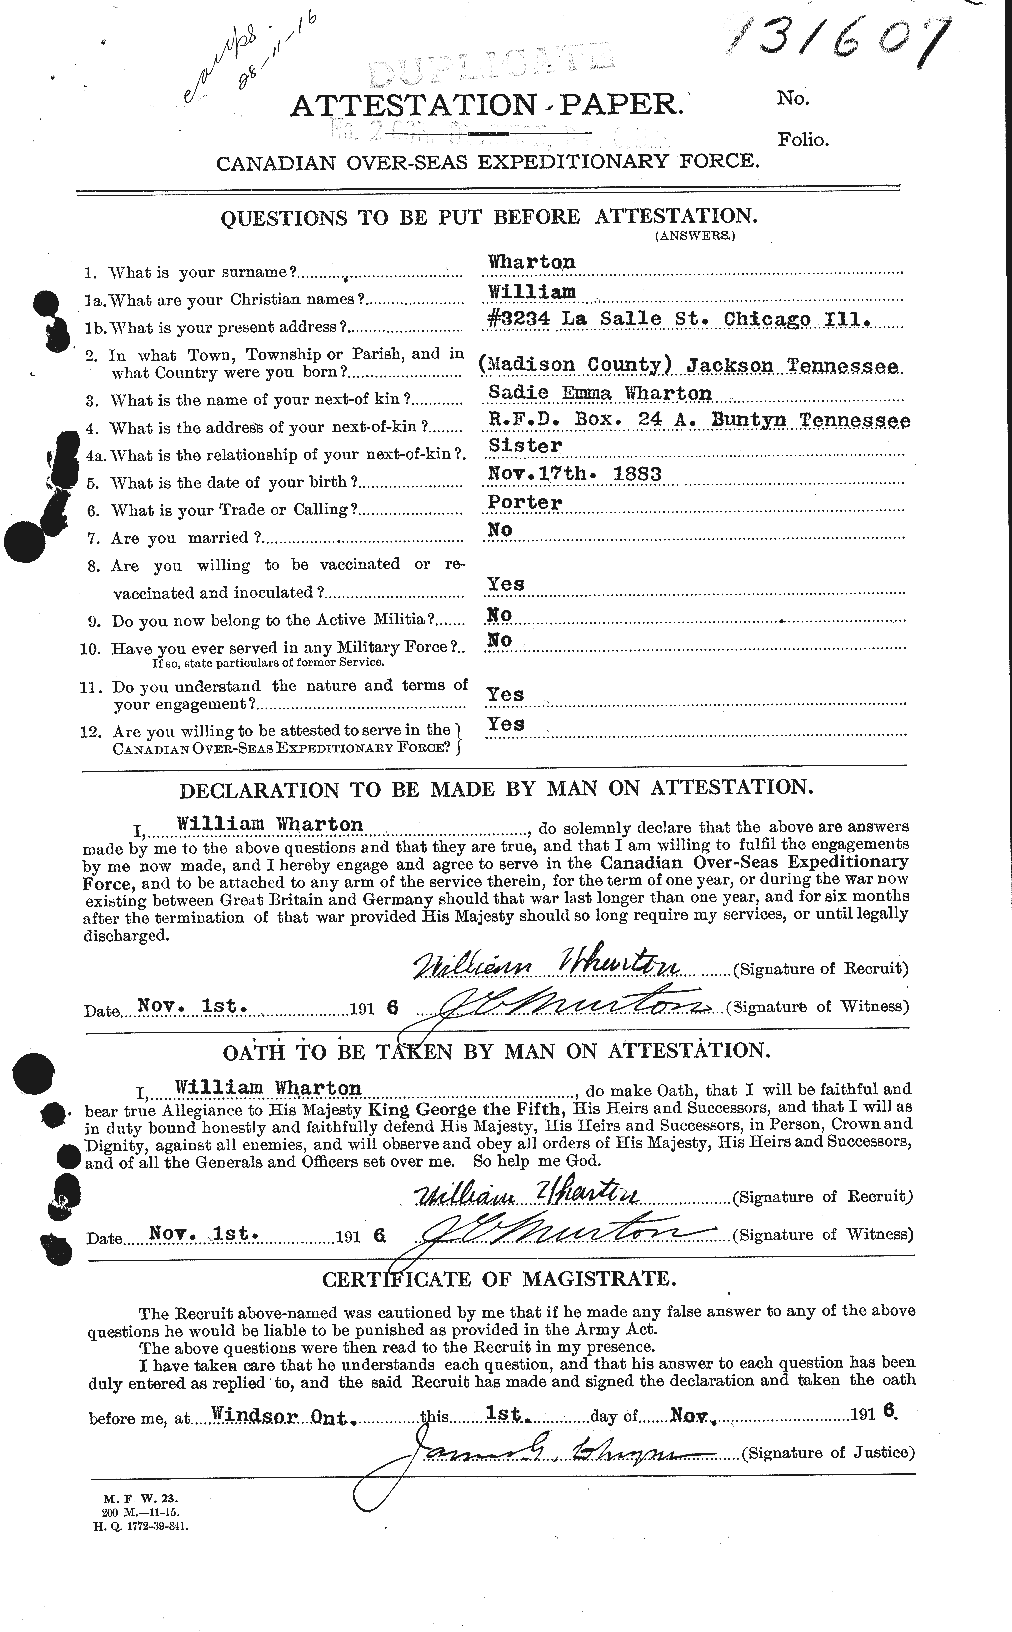 Personnel Records of the First World War - CEF 668250a